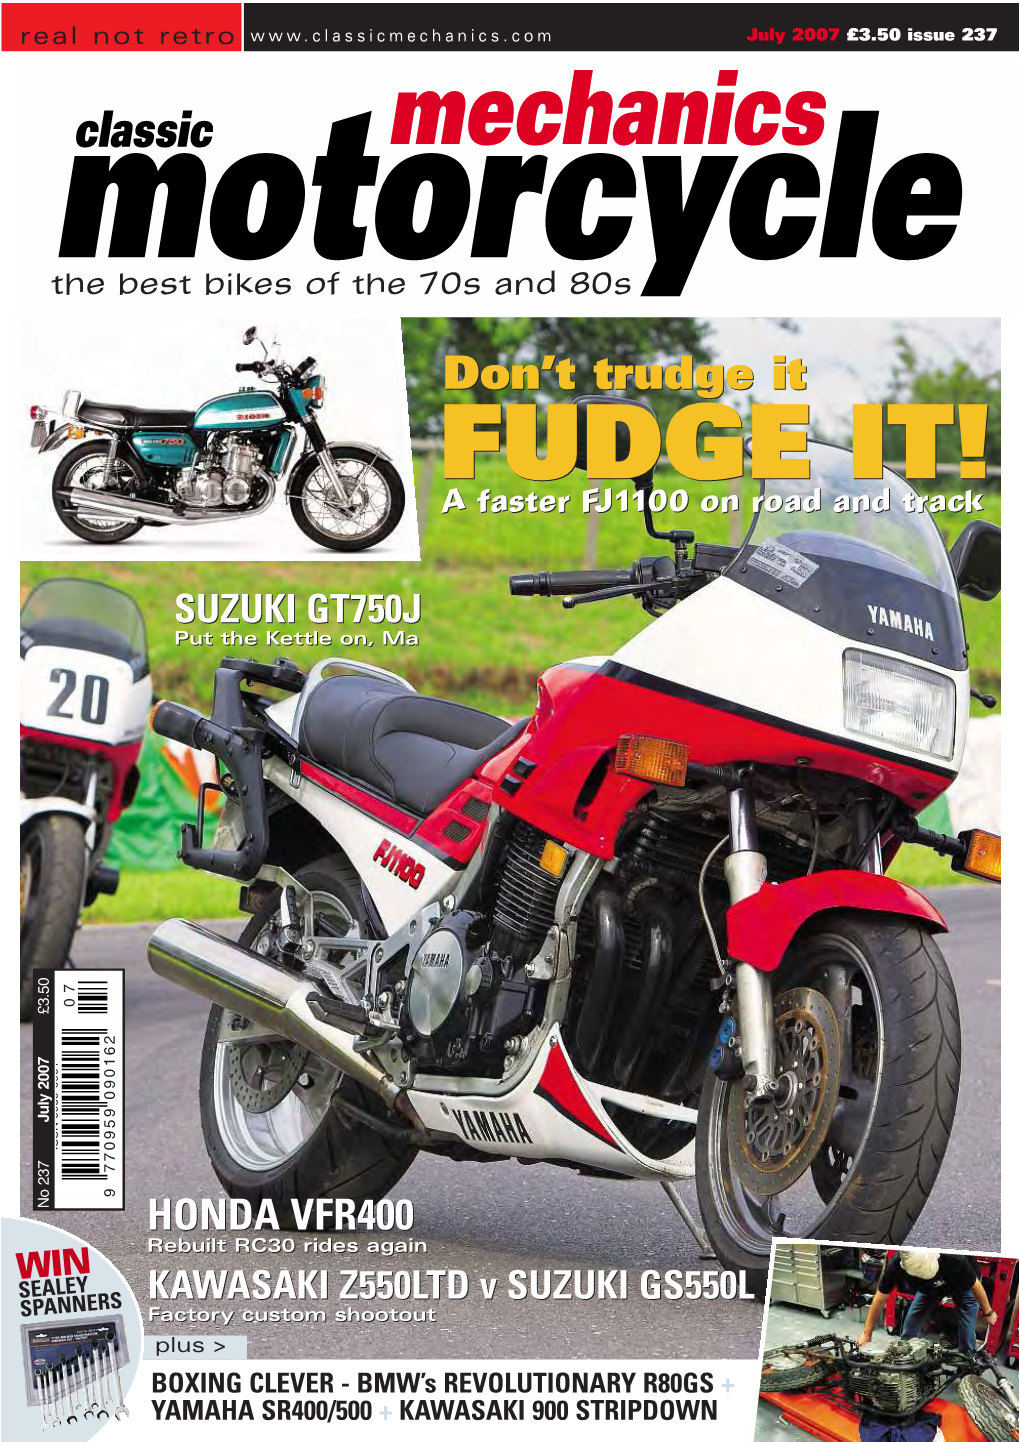 Classic Motorcycle Mechanics Is Published 12 Times a Year on the Third Wednesday of Every Month